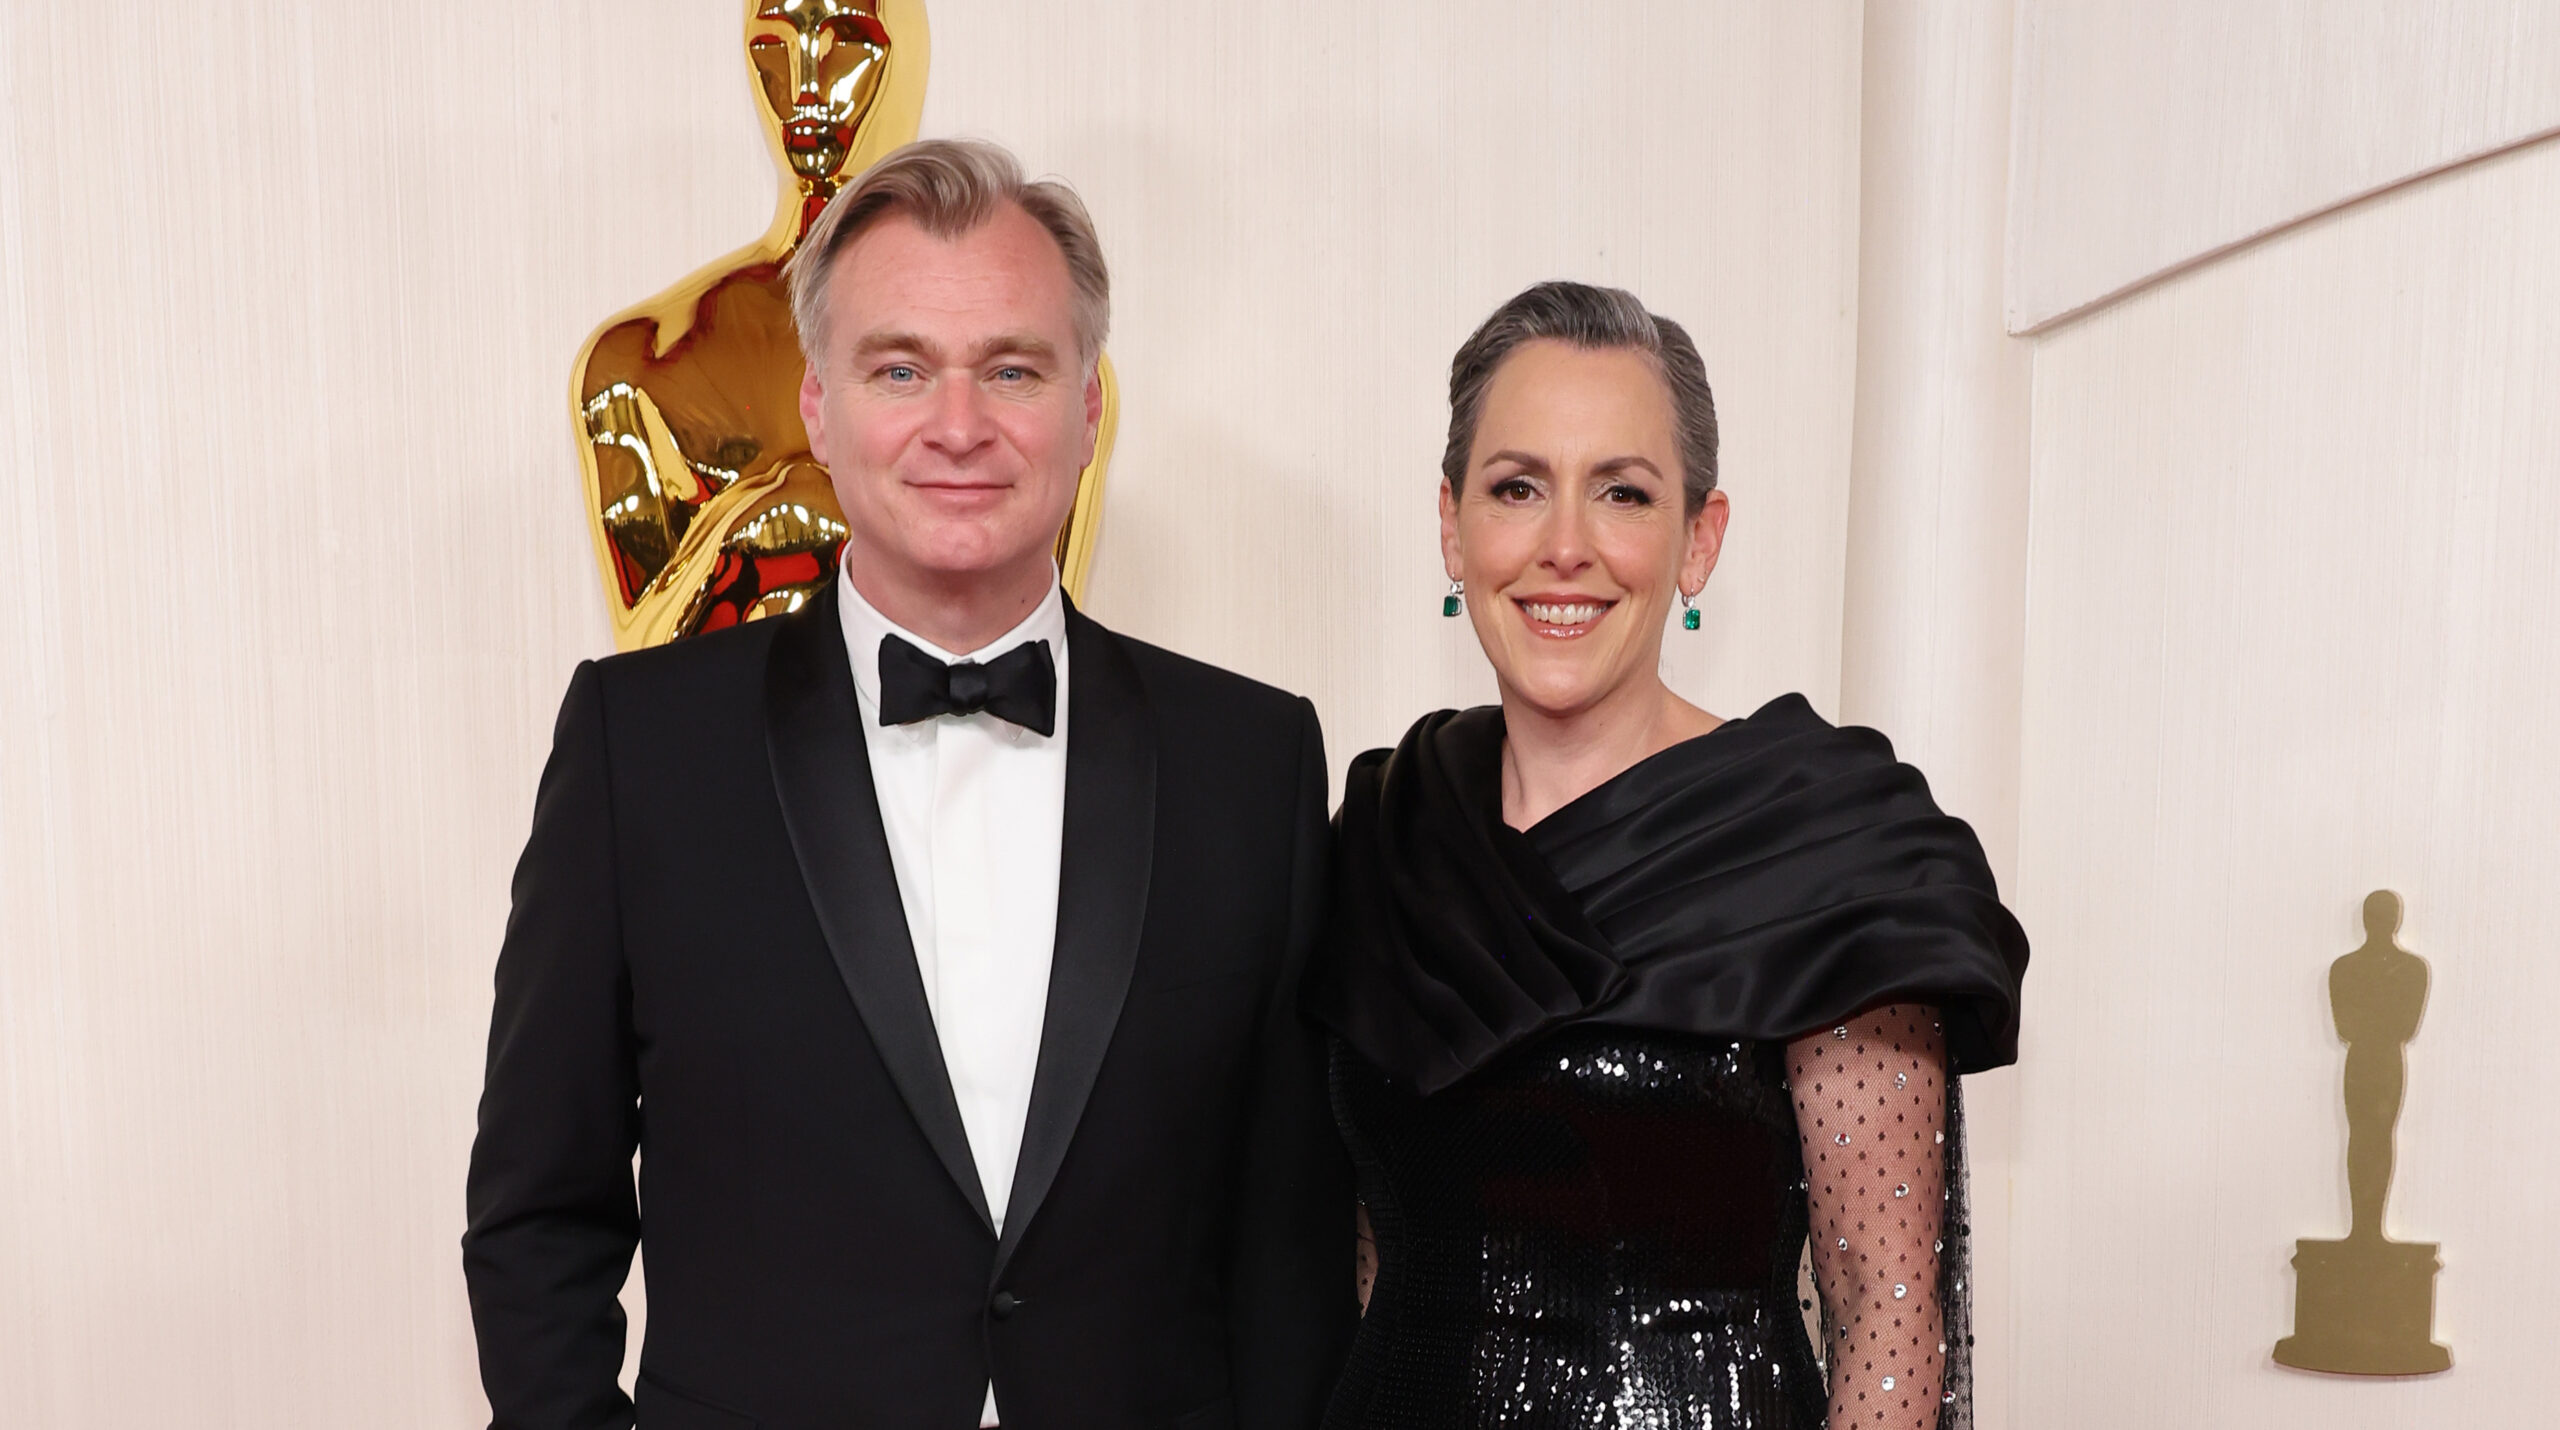 Christopher Nolan and Emma Thomas posing together on the red carpet at the 96th Annual Academy Awards, with Nolan in a classic black Dior tuxedo and Thomas in an elegant black gown with sequin and sheer detailing.